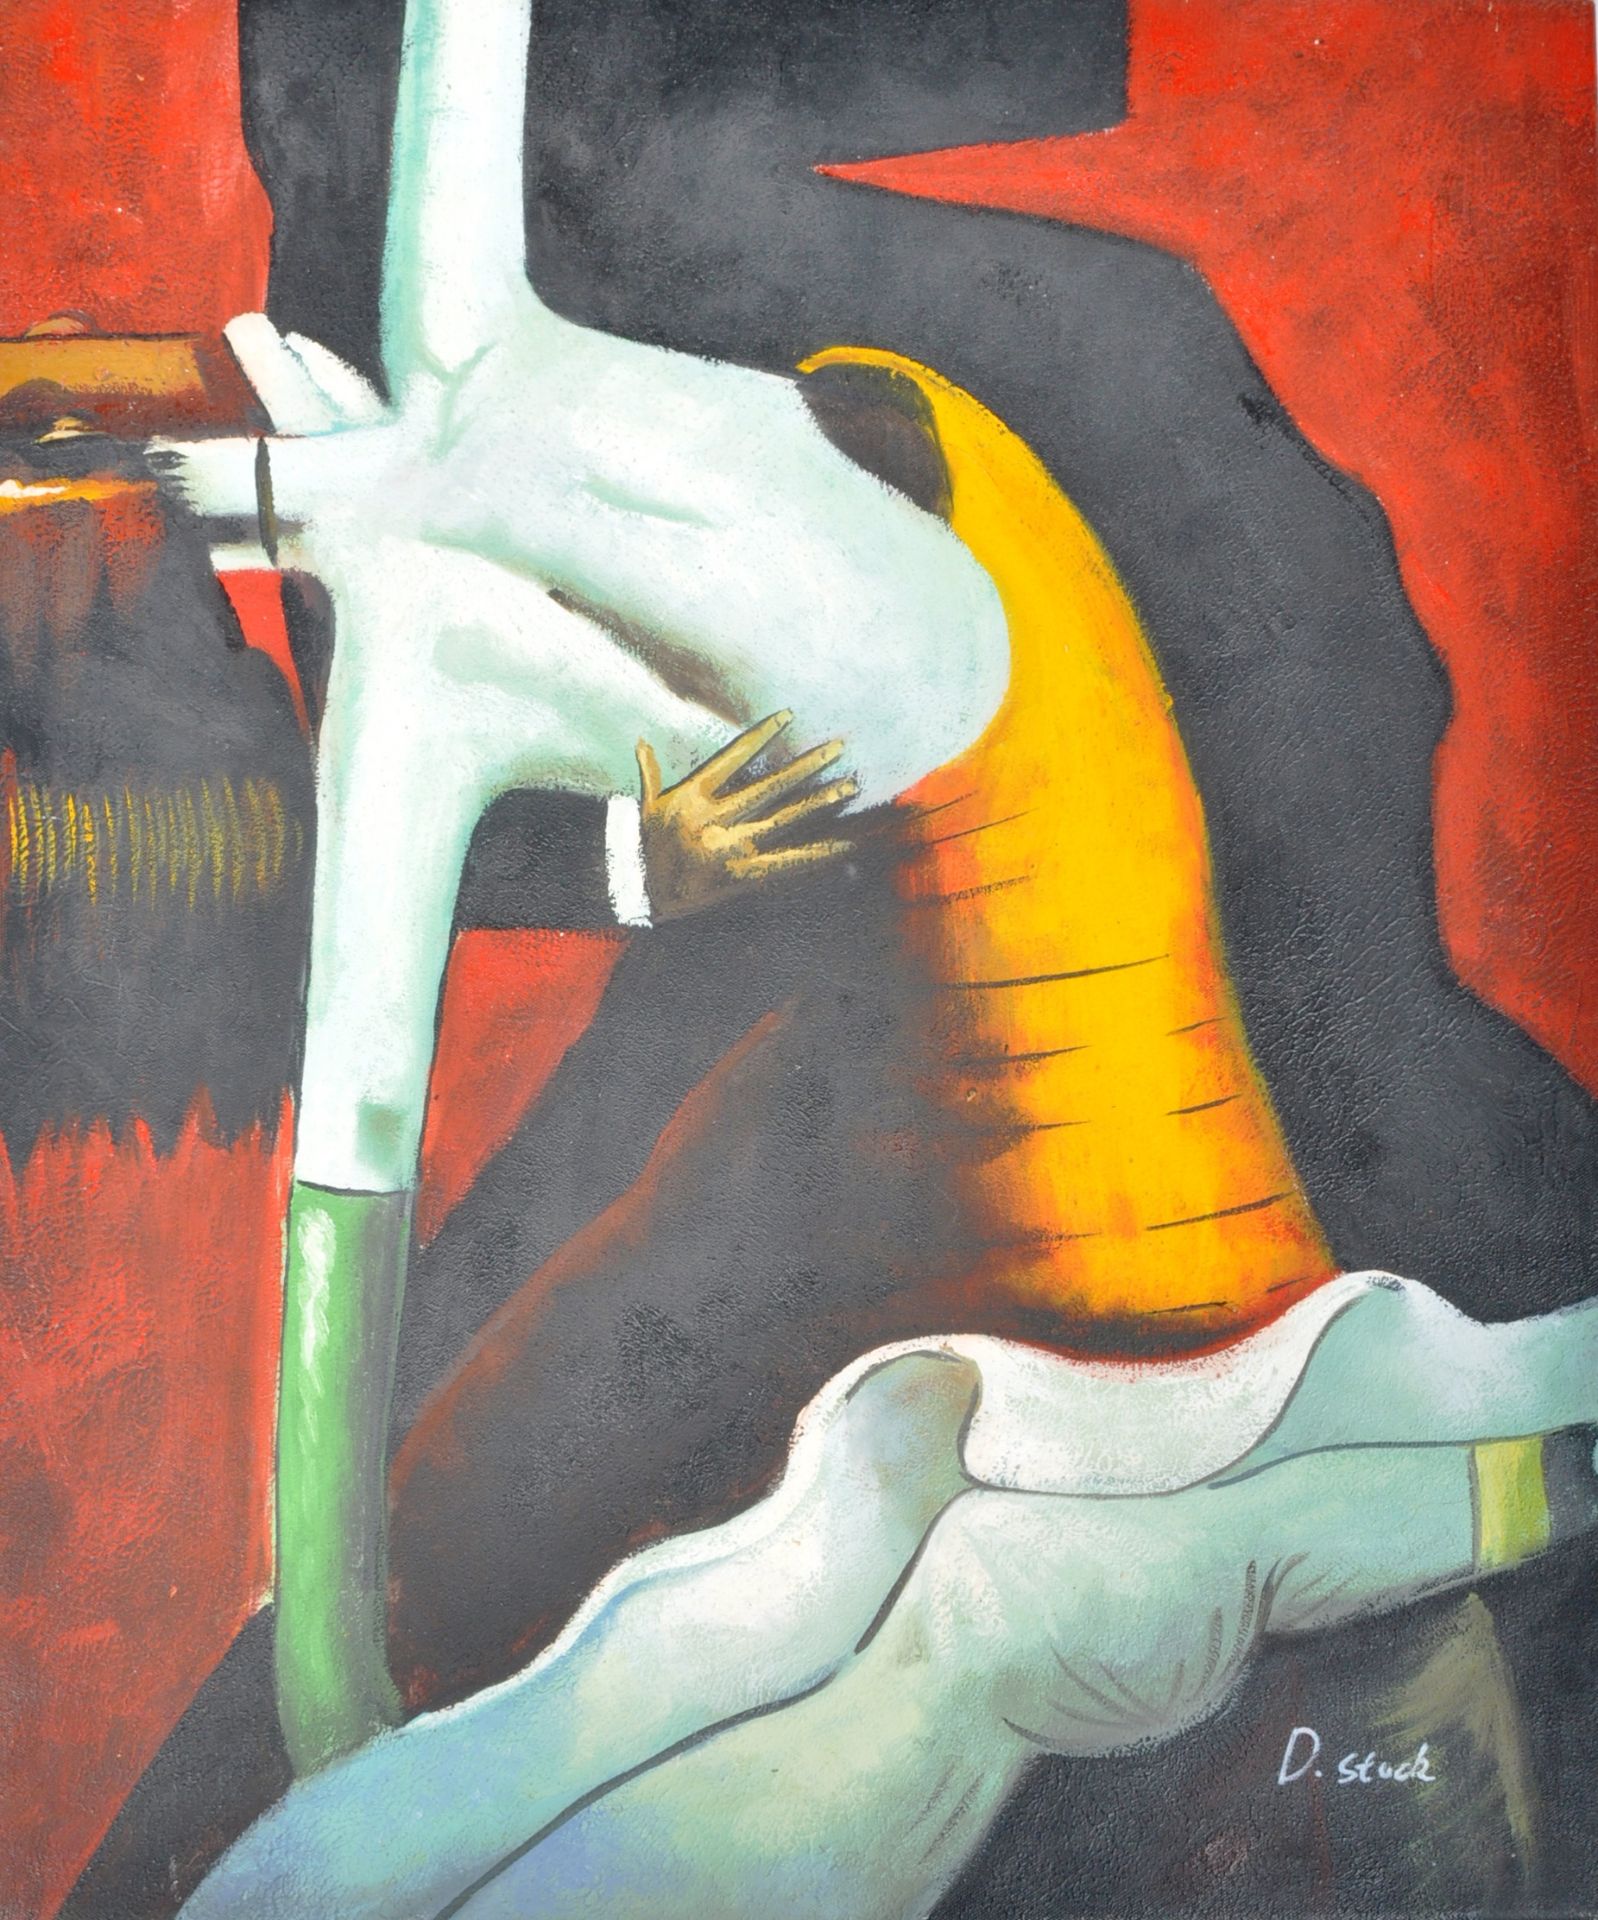 D STACK - 20TH CENTURY SURREAL OIL ON CANVAS PAINTING - Image 2 of 7